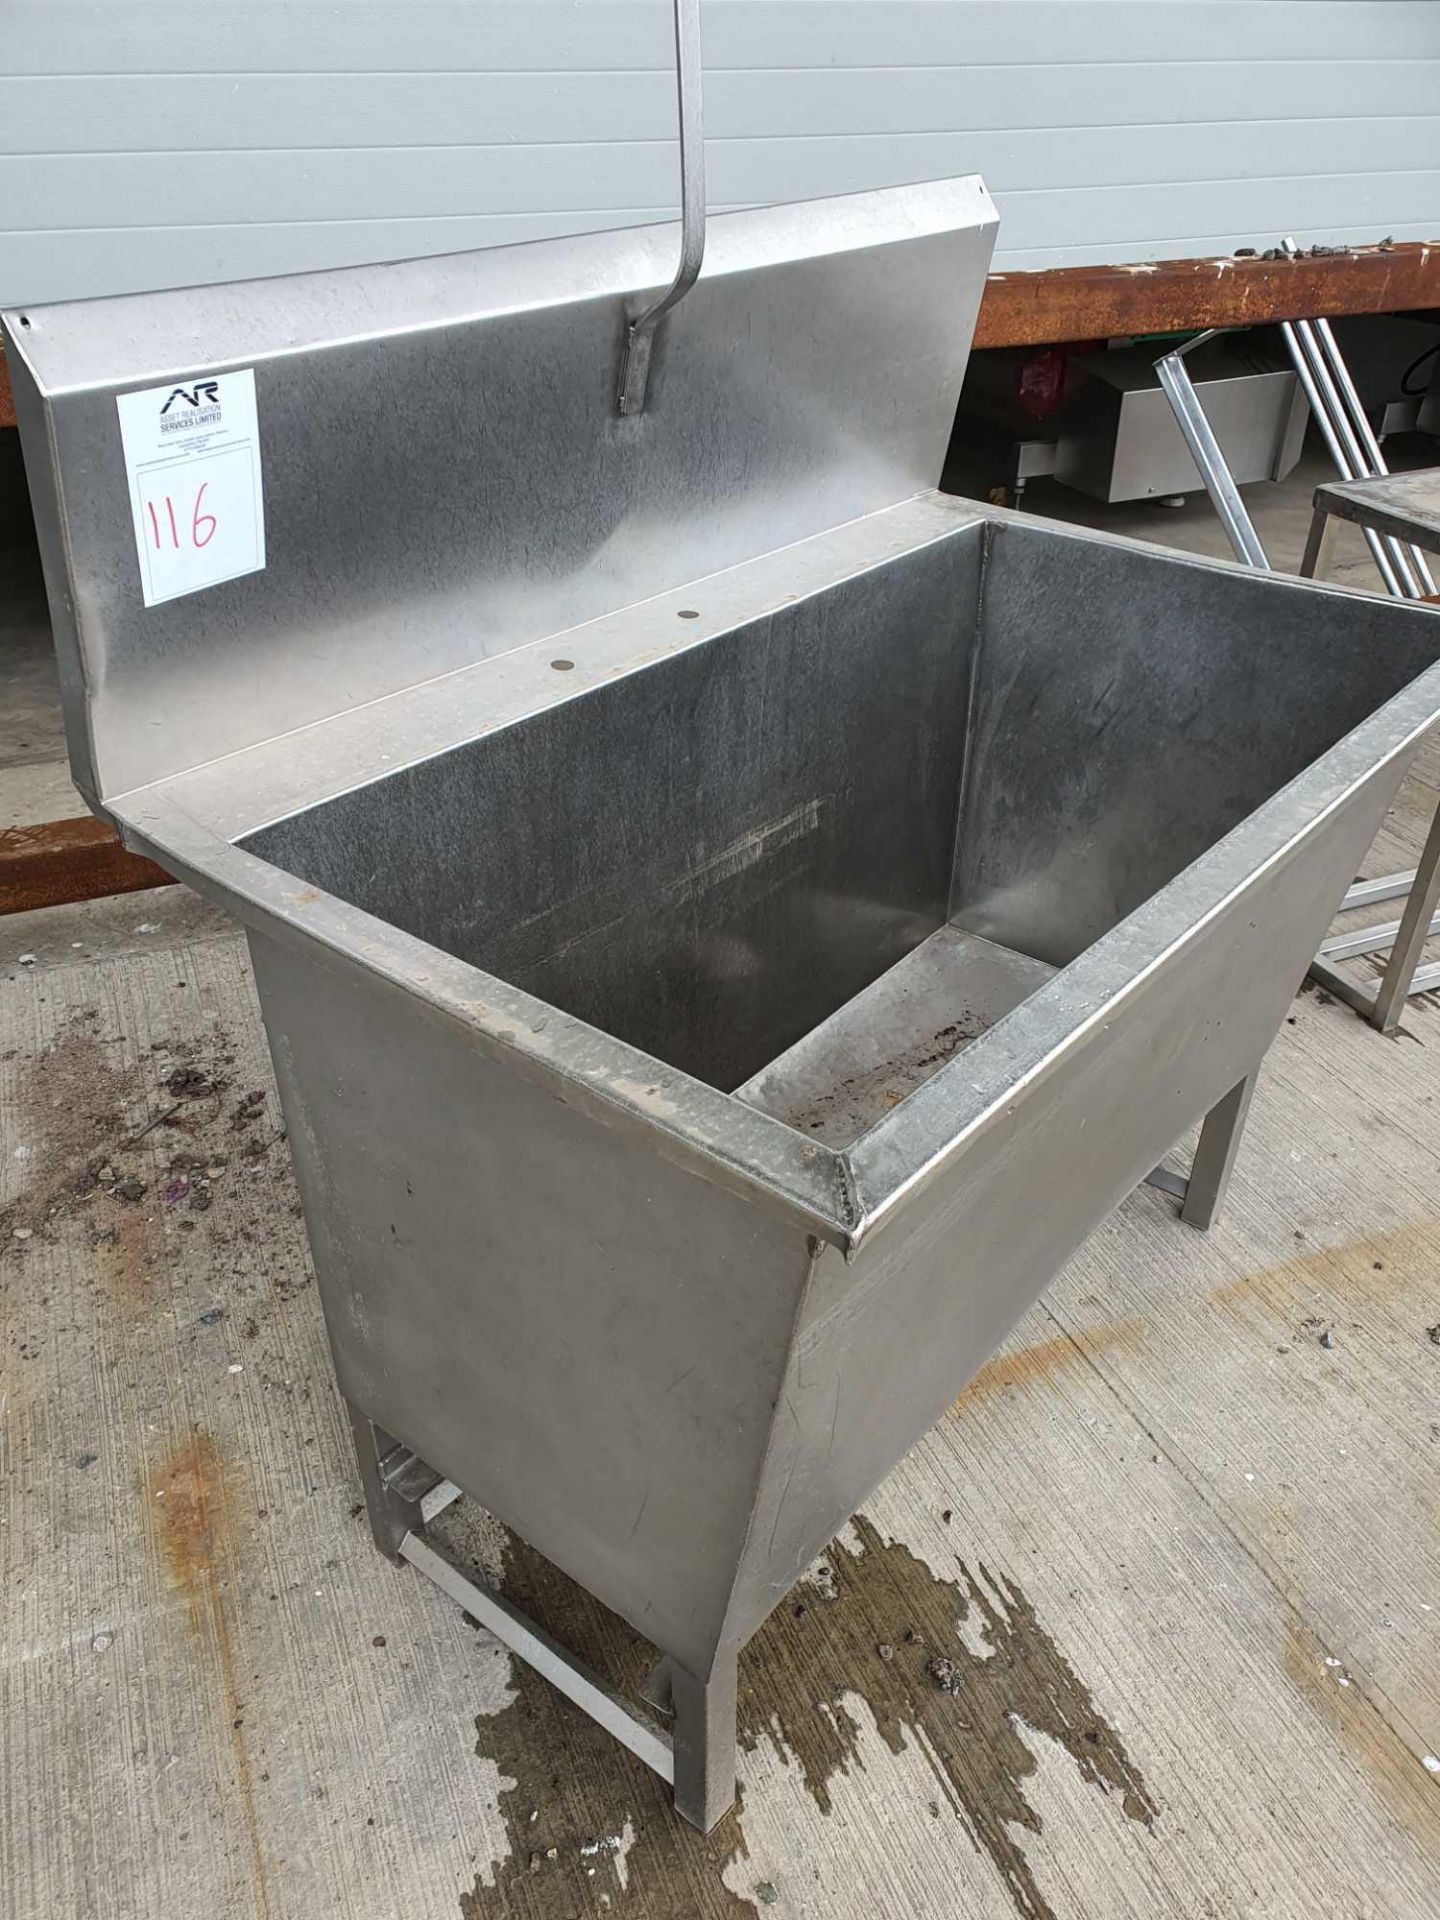 Stainless steel sink - Image 2 of 2